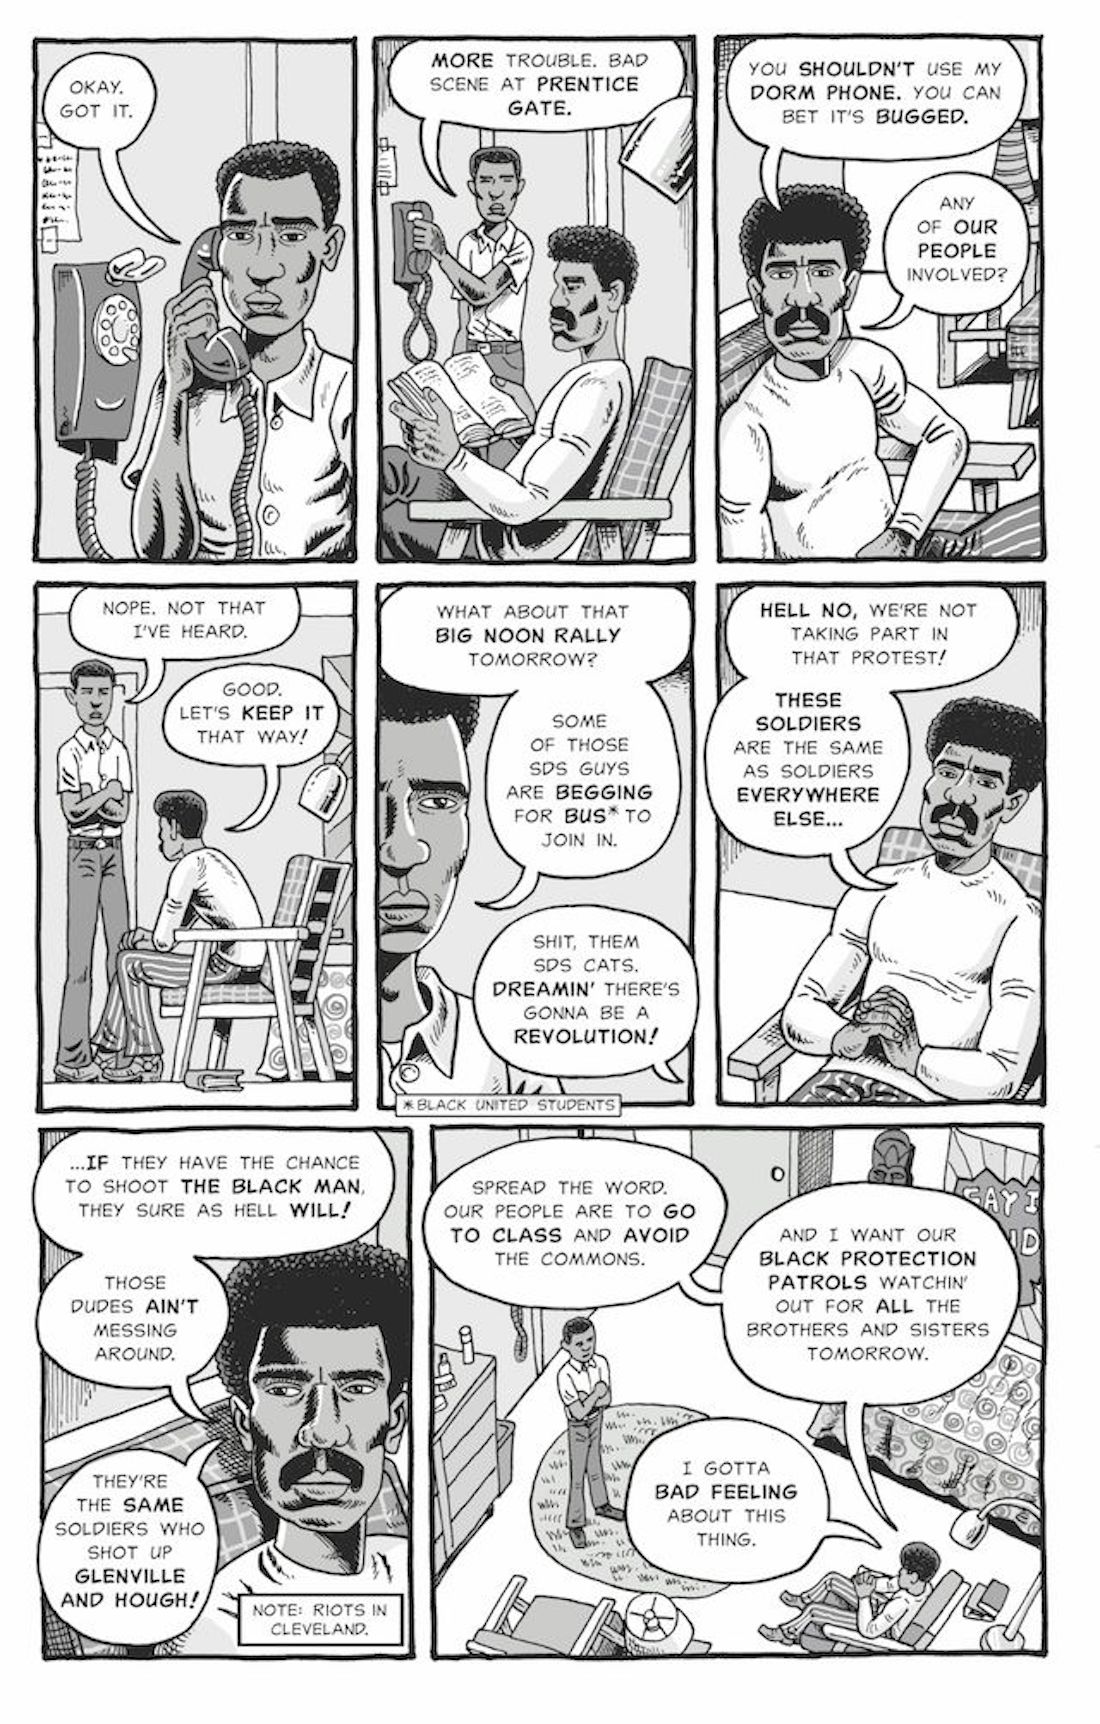 Page from John Derf Backderf's graphic novel Kent State: Four Dead in Ohio